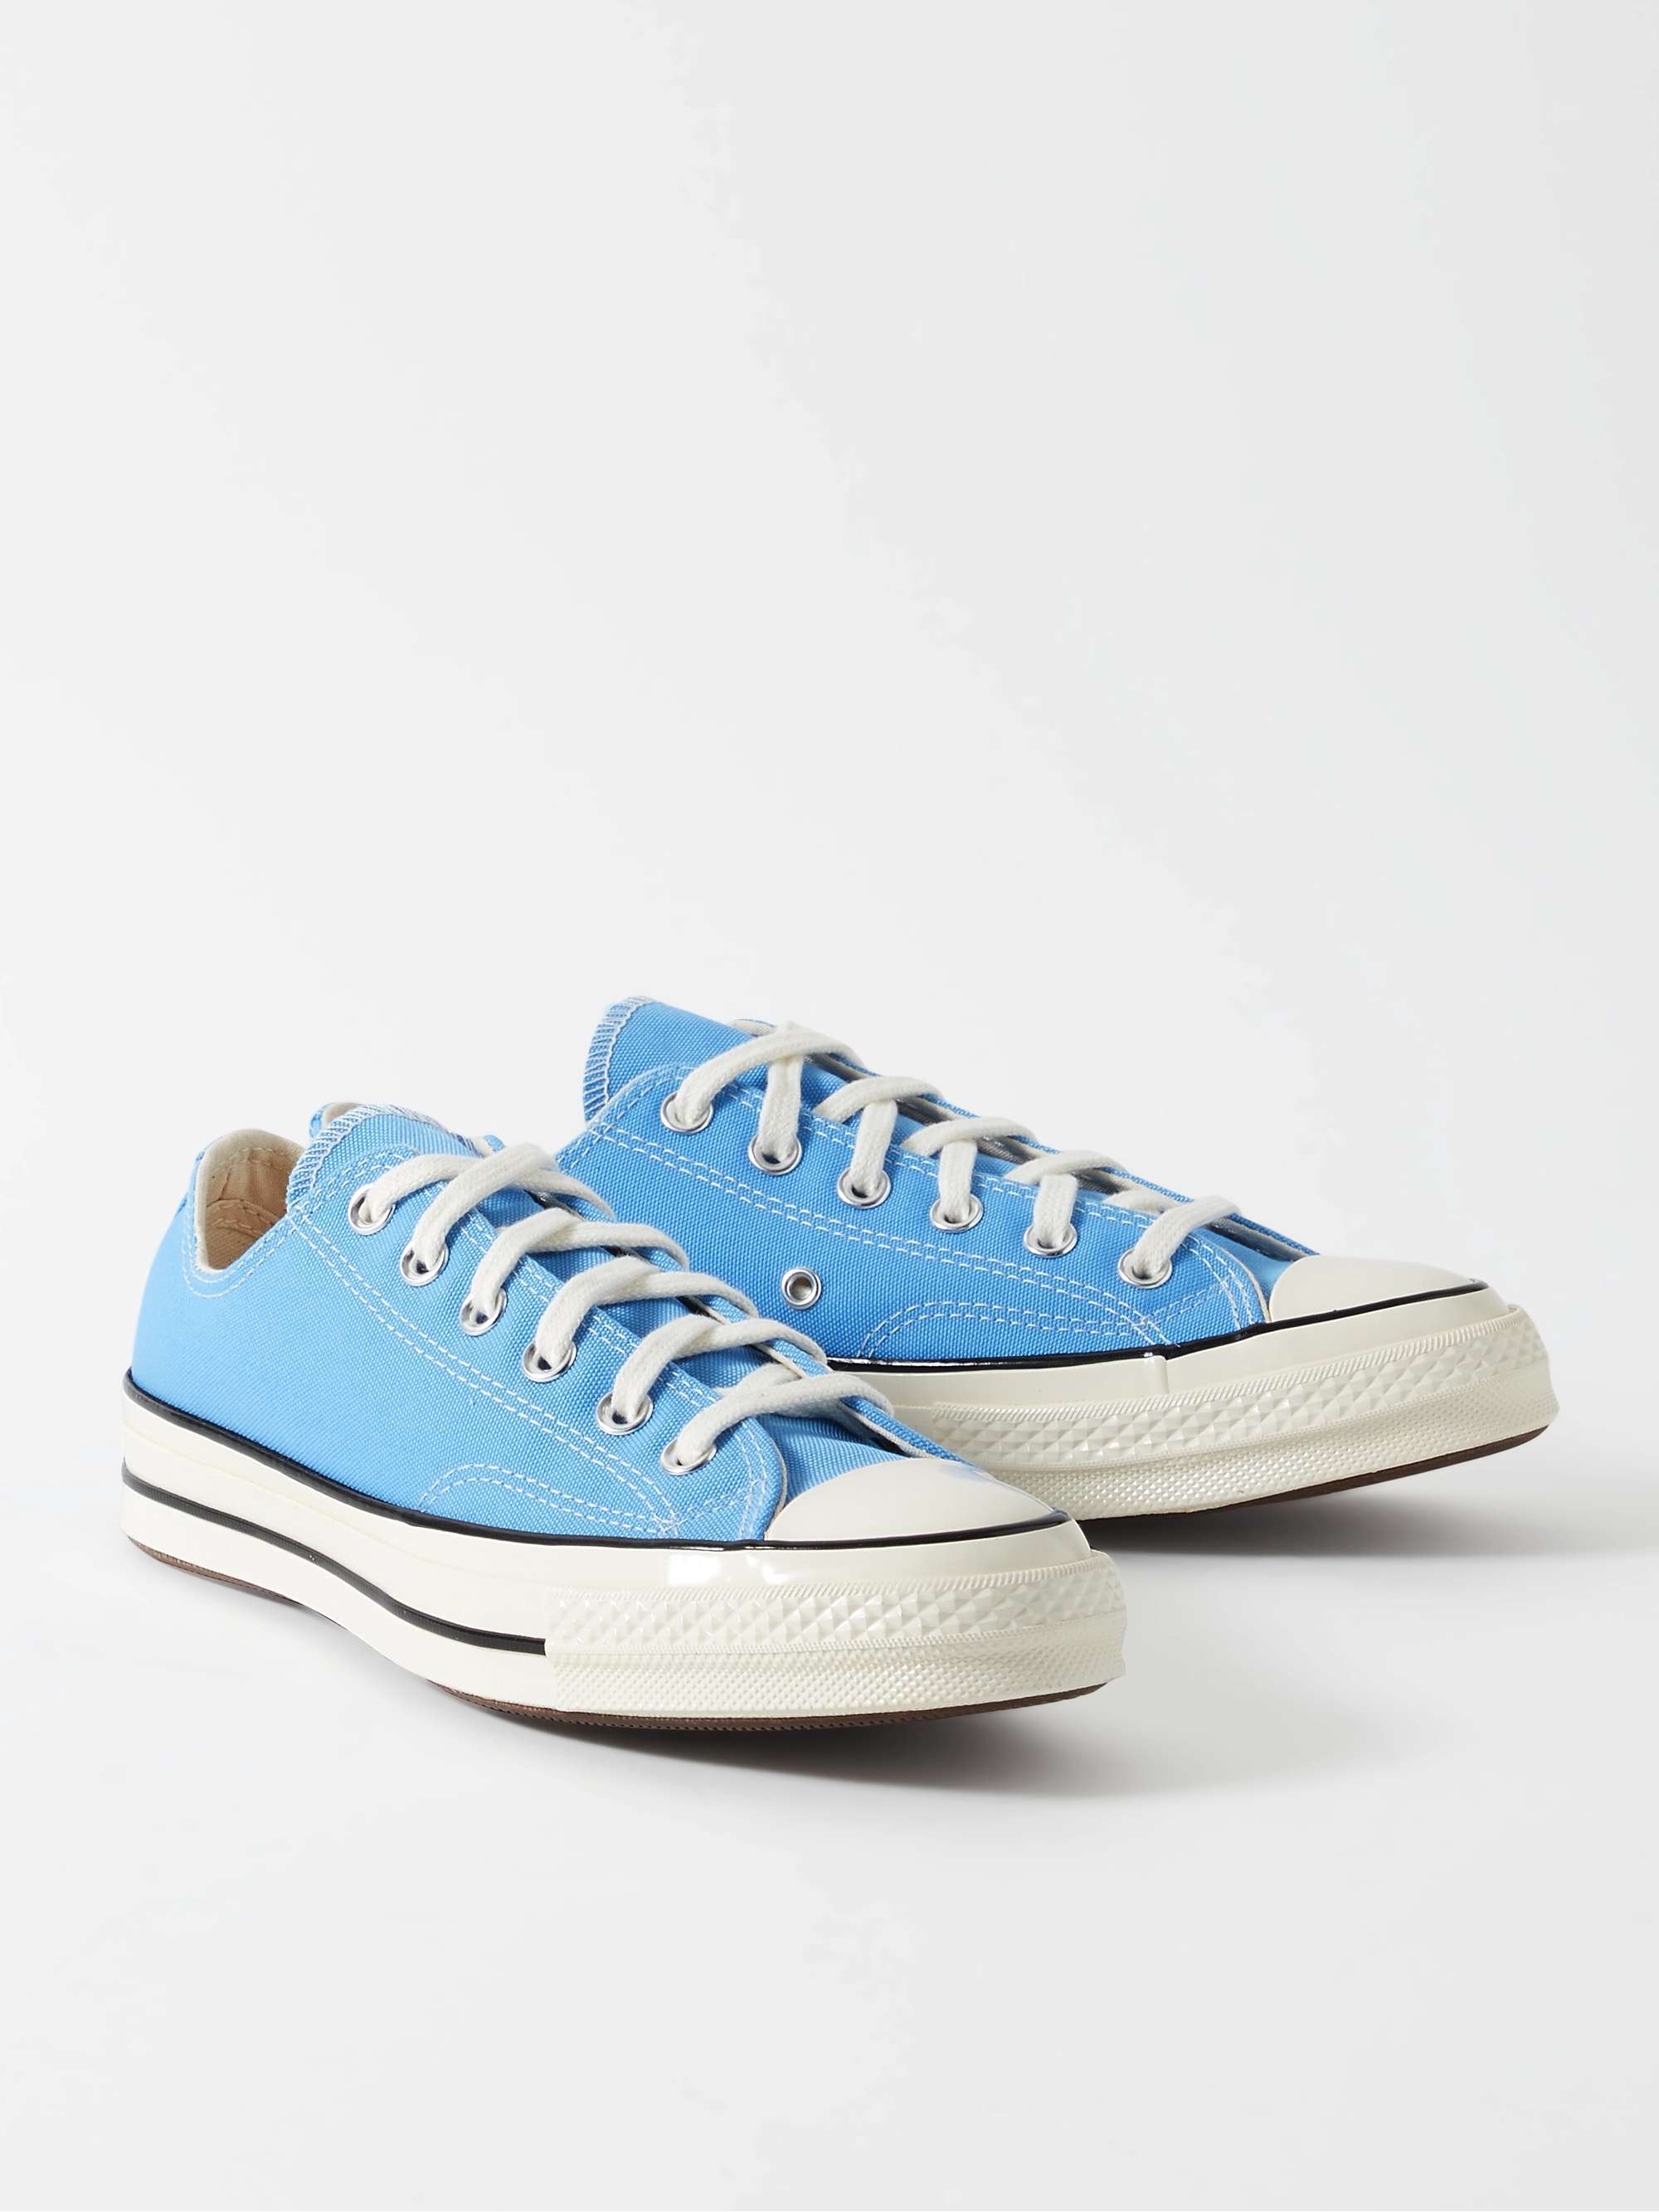 CONVERSE Chuck 70 OX Recycled Canvas Sneakers